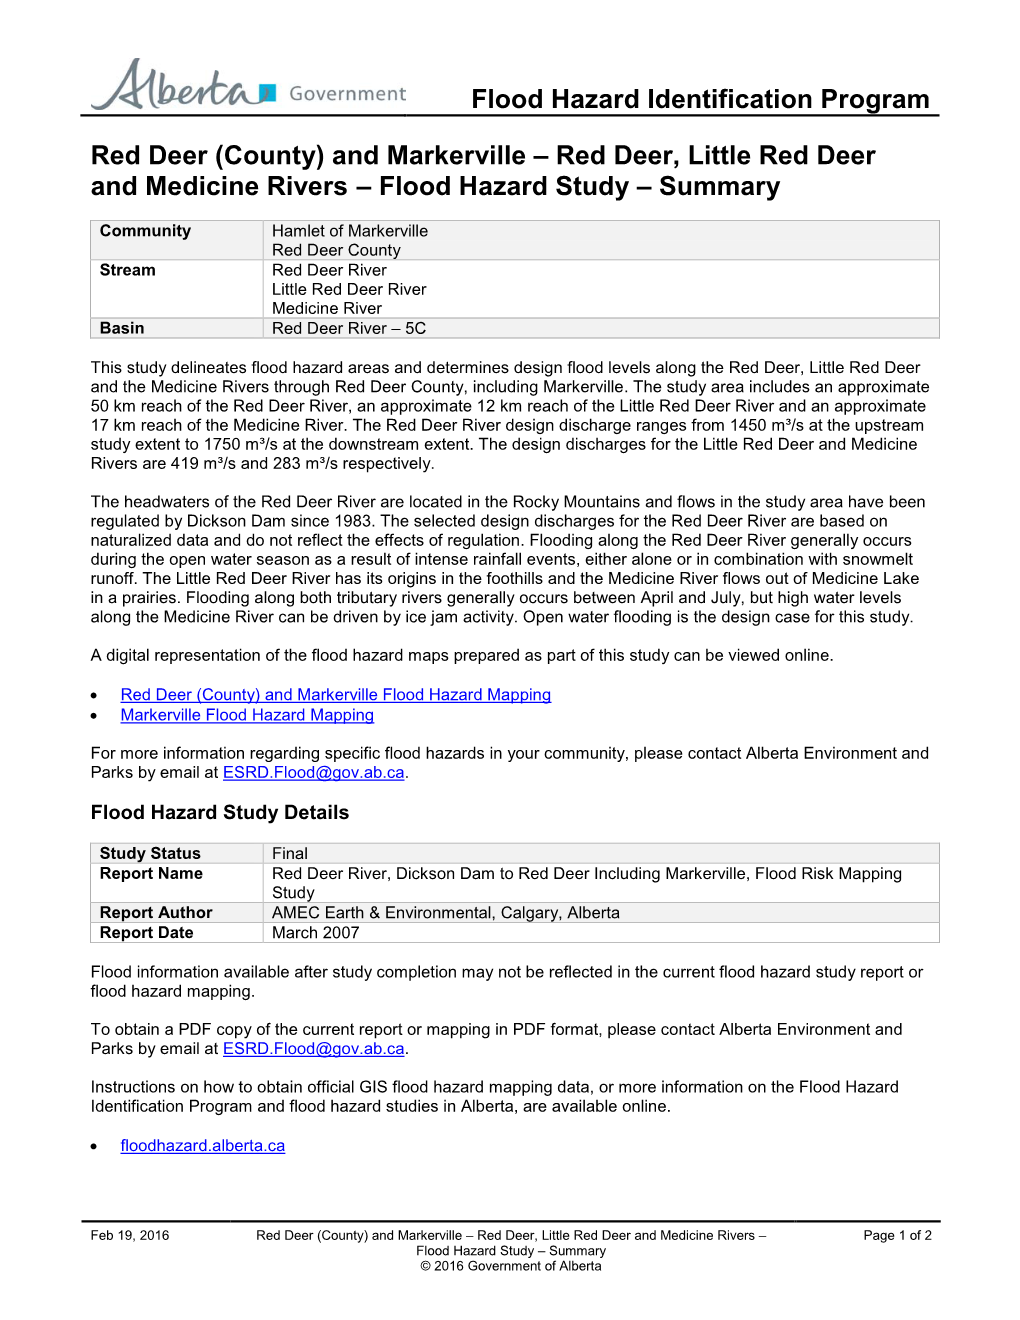 Red Deer (County) and Markerville – Red Deer, Little Red Deer and Medicine Rivers – Flood Hazard Study – Summary